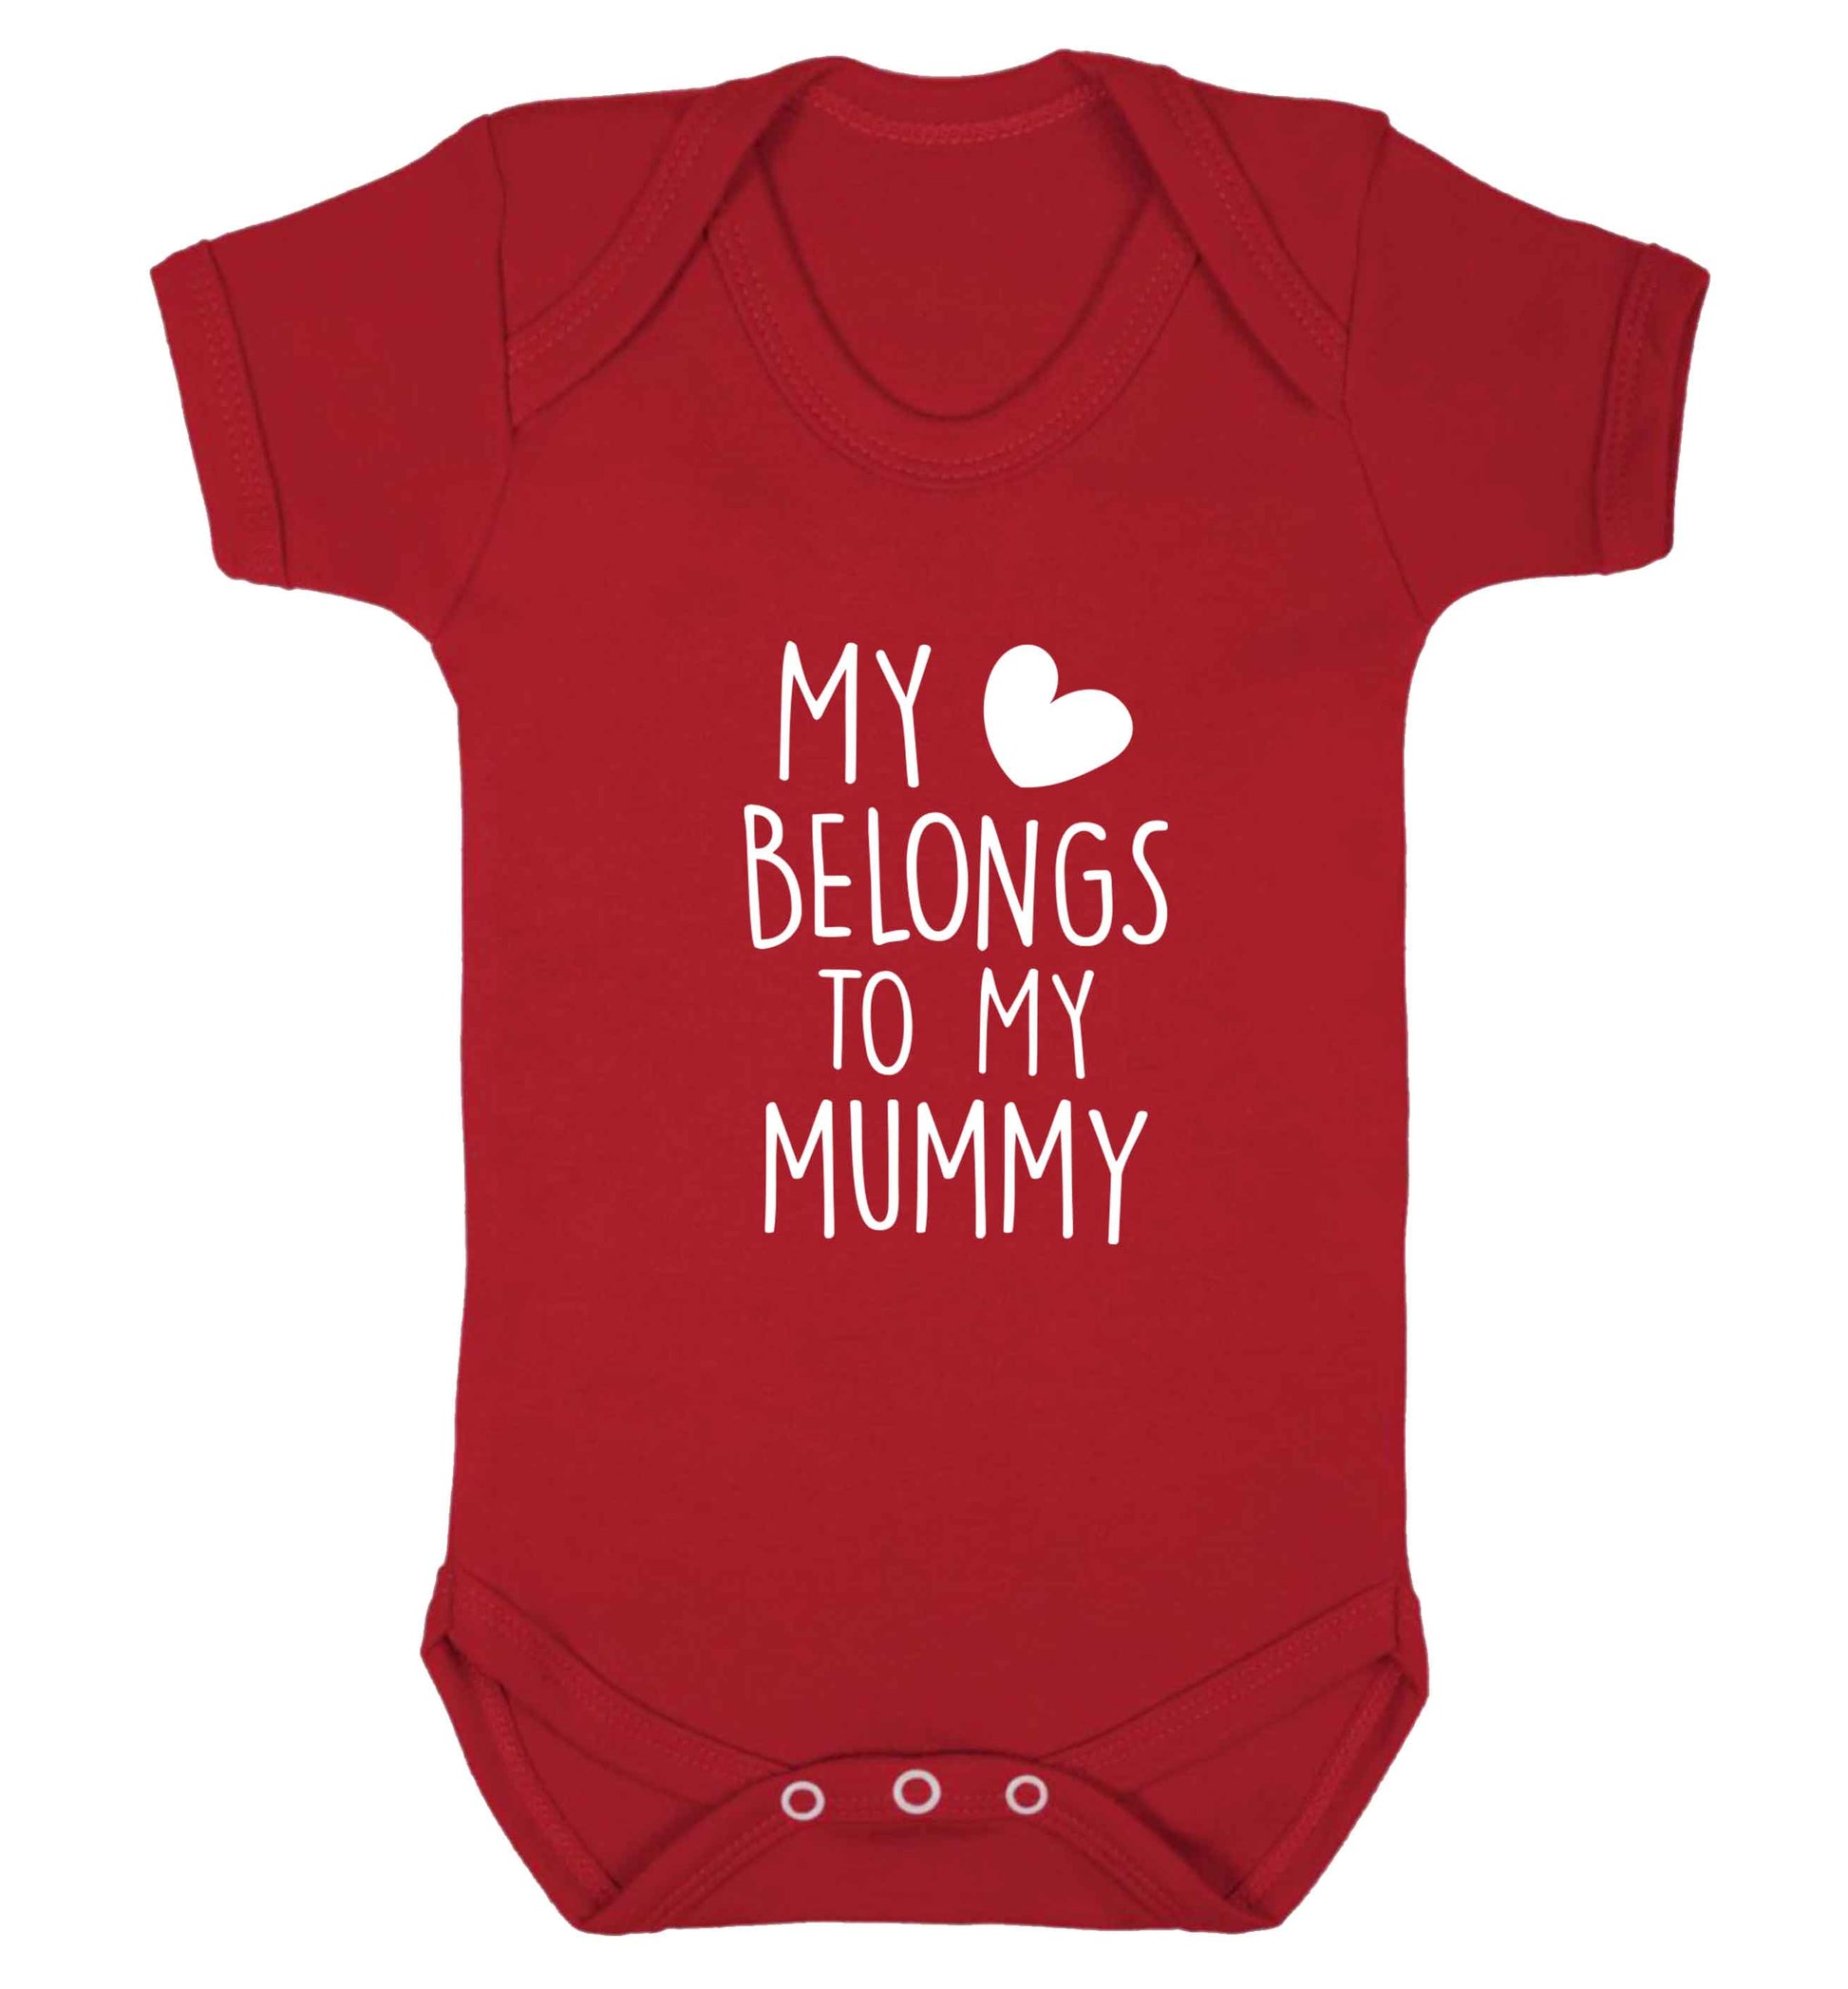 My heart belongs to my mummy baby vest red 18-24 months